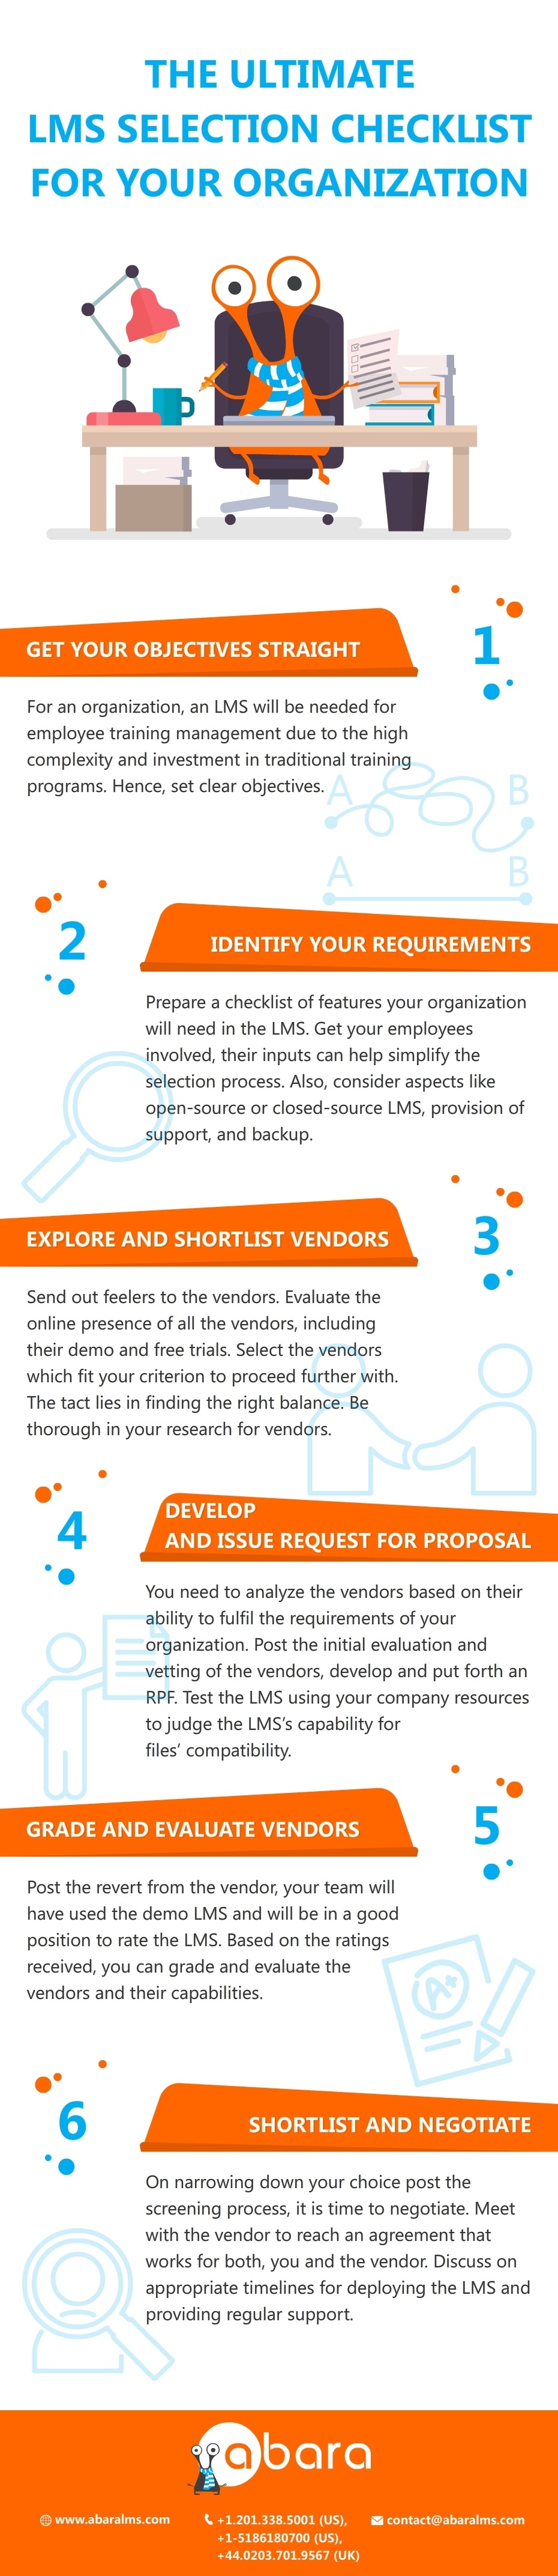 The Ultimate LMS Selection Checklist for Your Organization Infographic